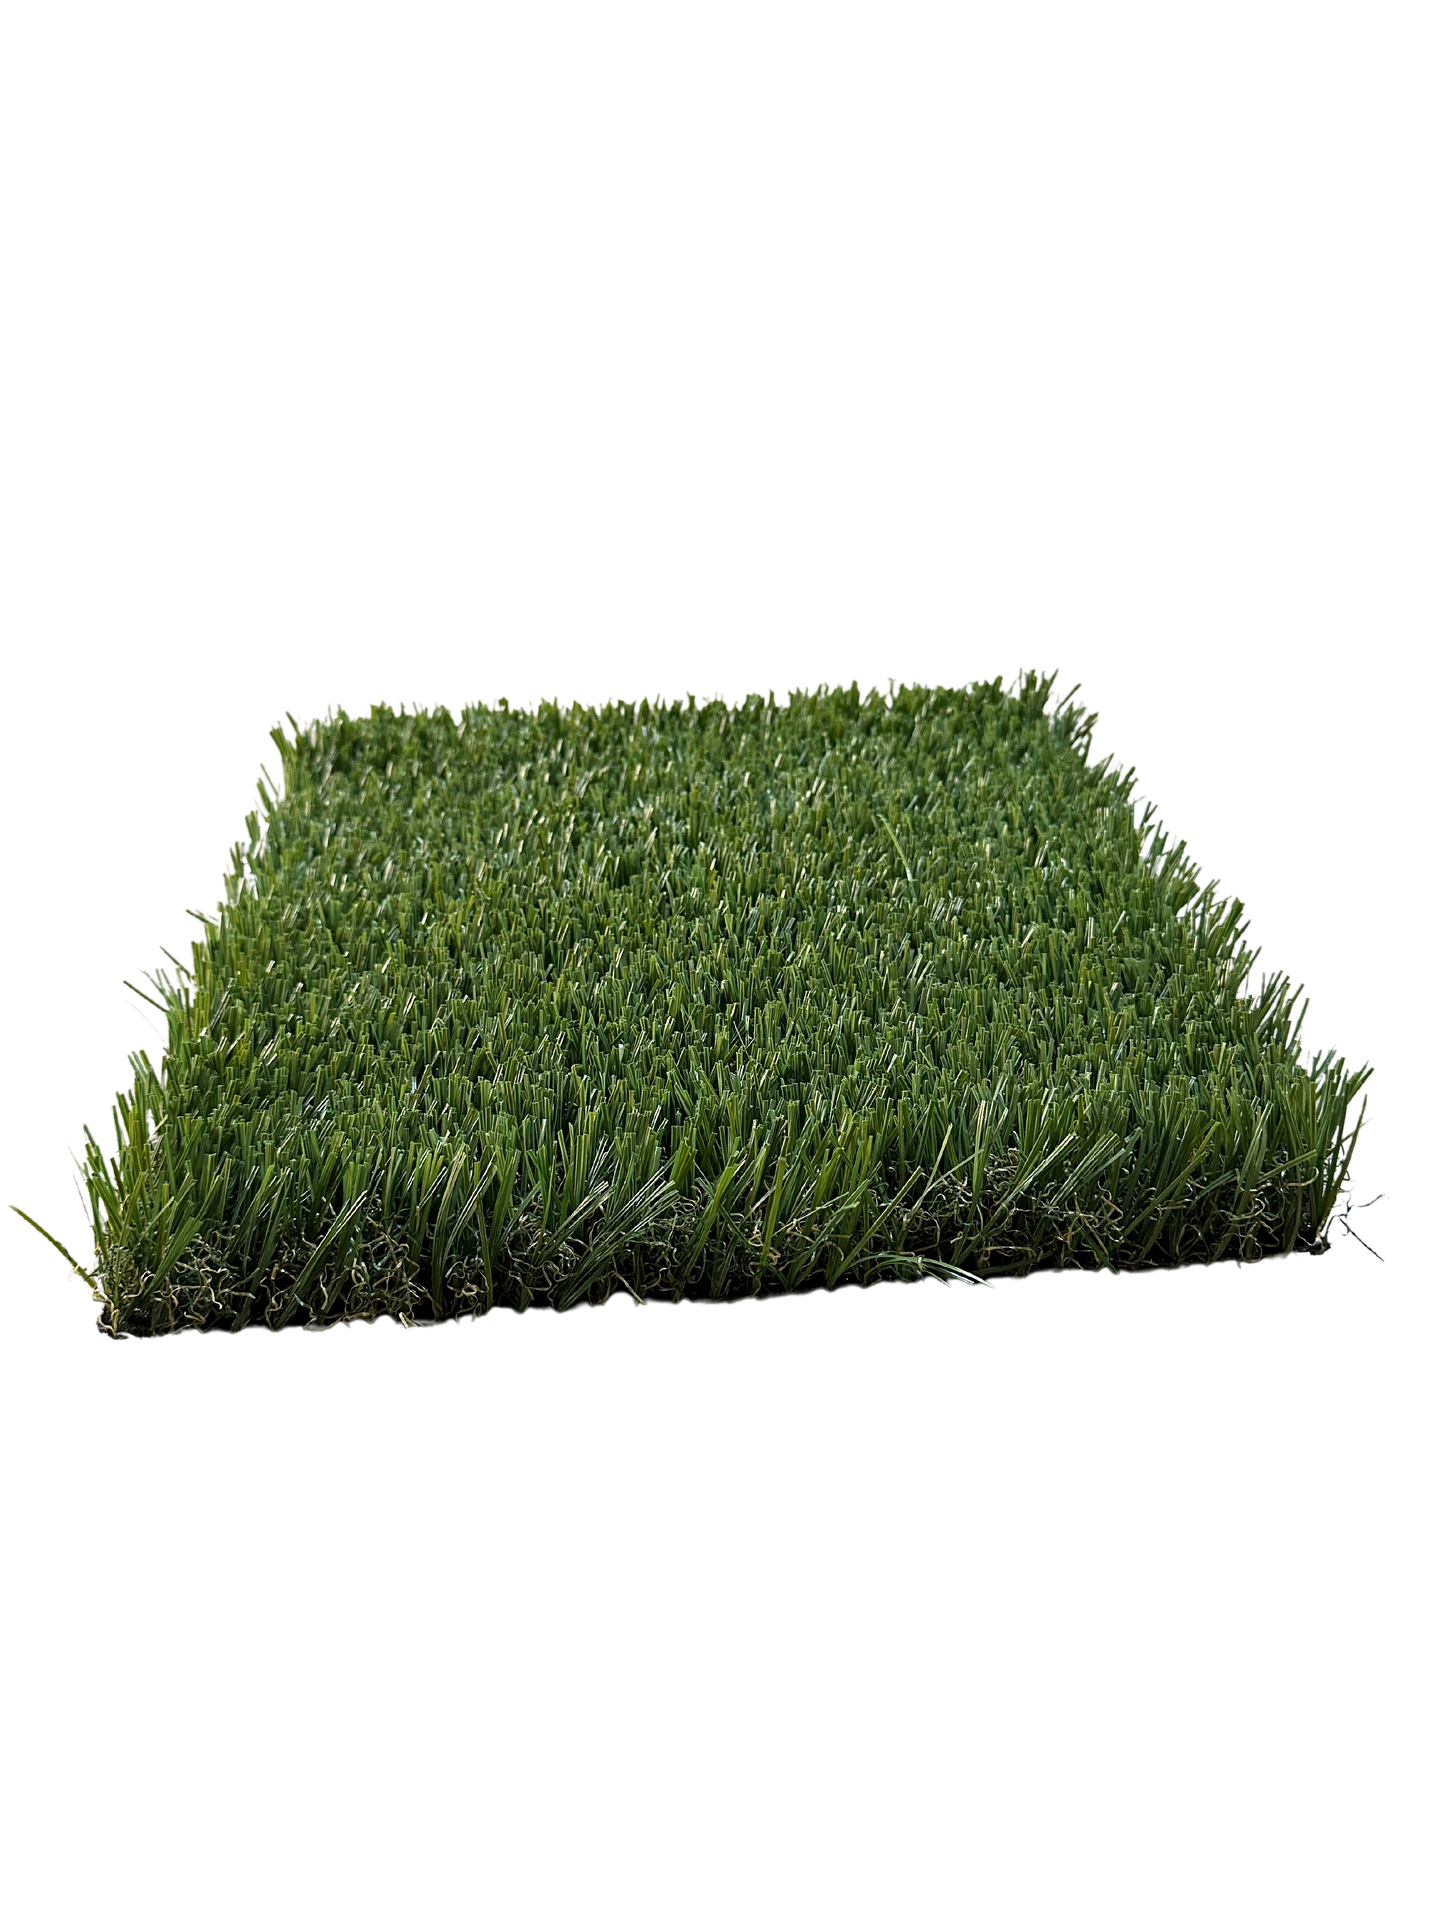 Strong Artificial Turf